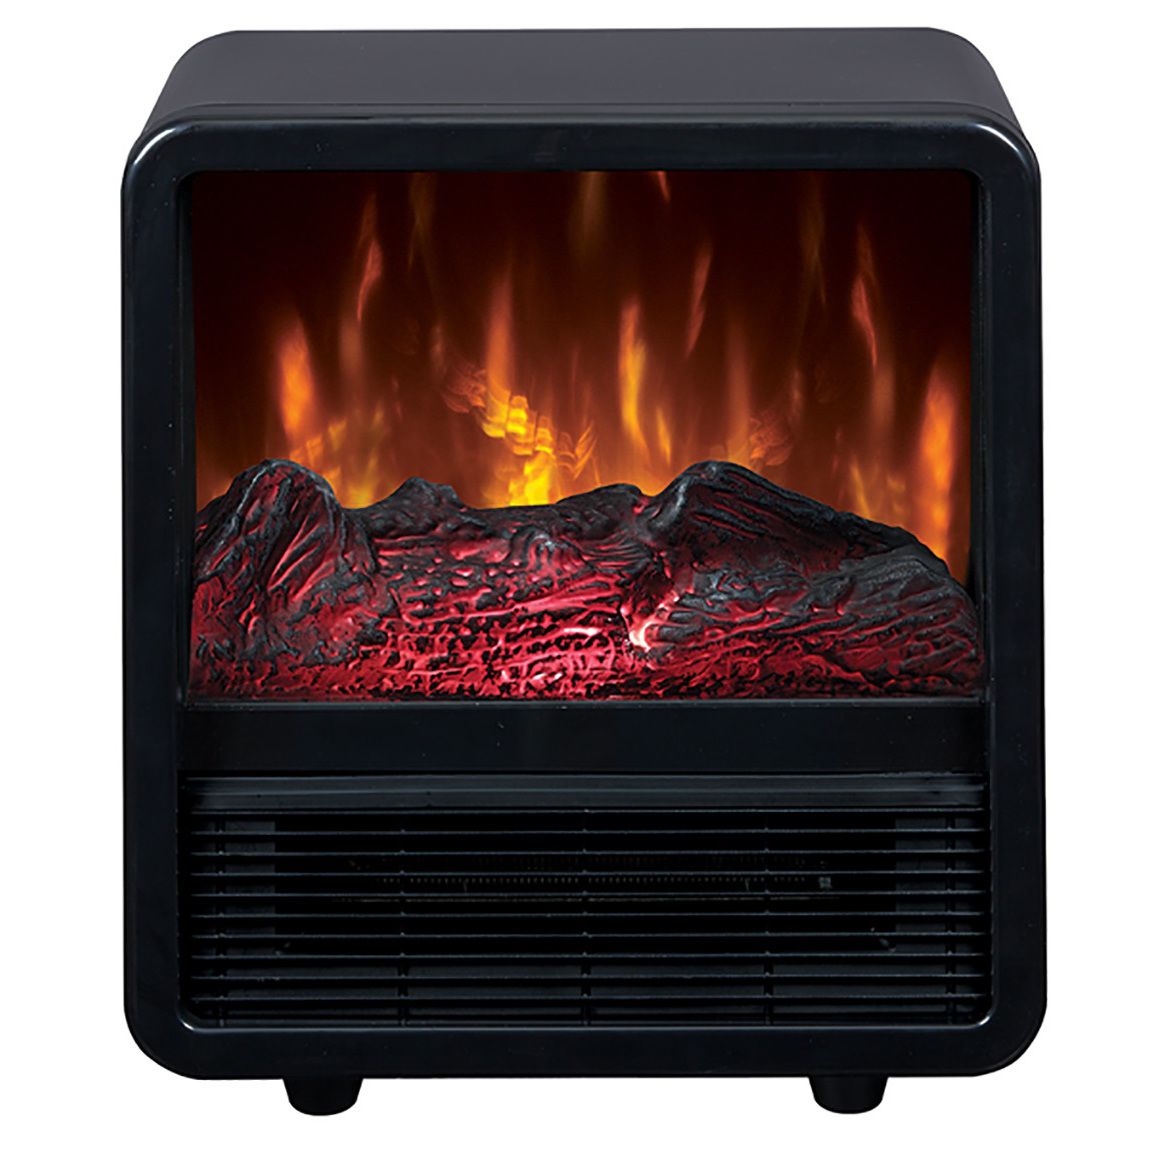 Portable Fireplace Inspirational Duraflame Cfs 300 Blk Portable Electric Personal Space